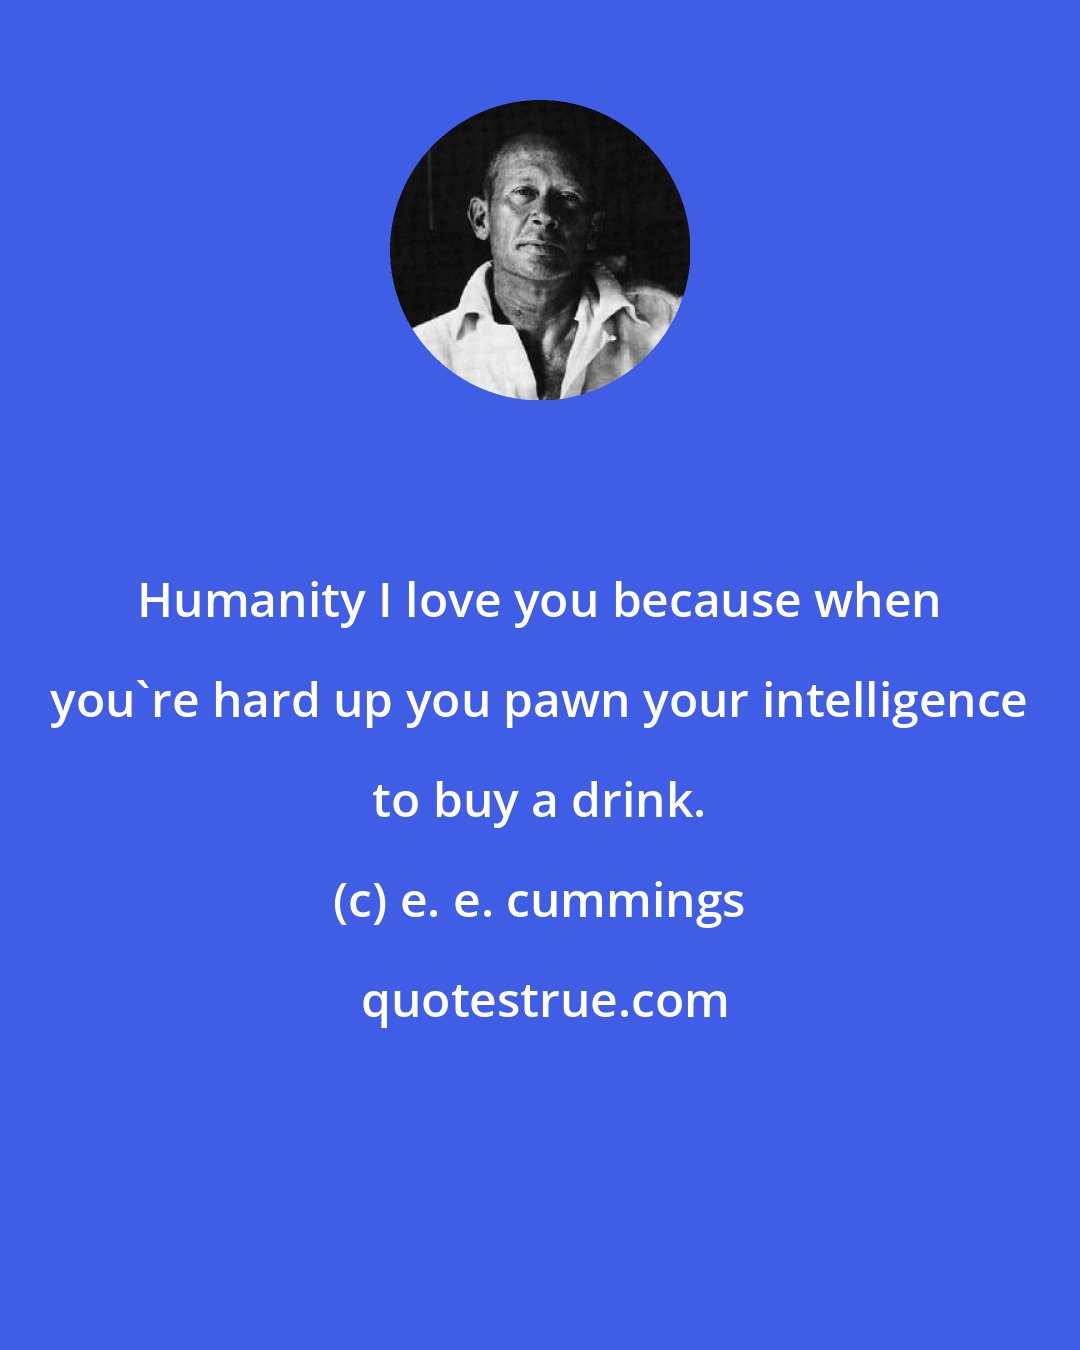 e. e. cummings: Humanity I love you because when you're hard up you pawn your intelligence to buy a drink.